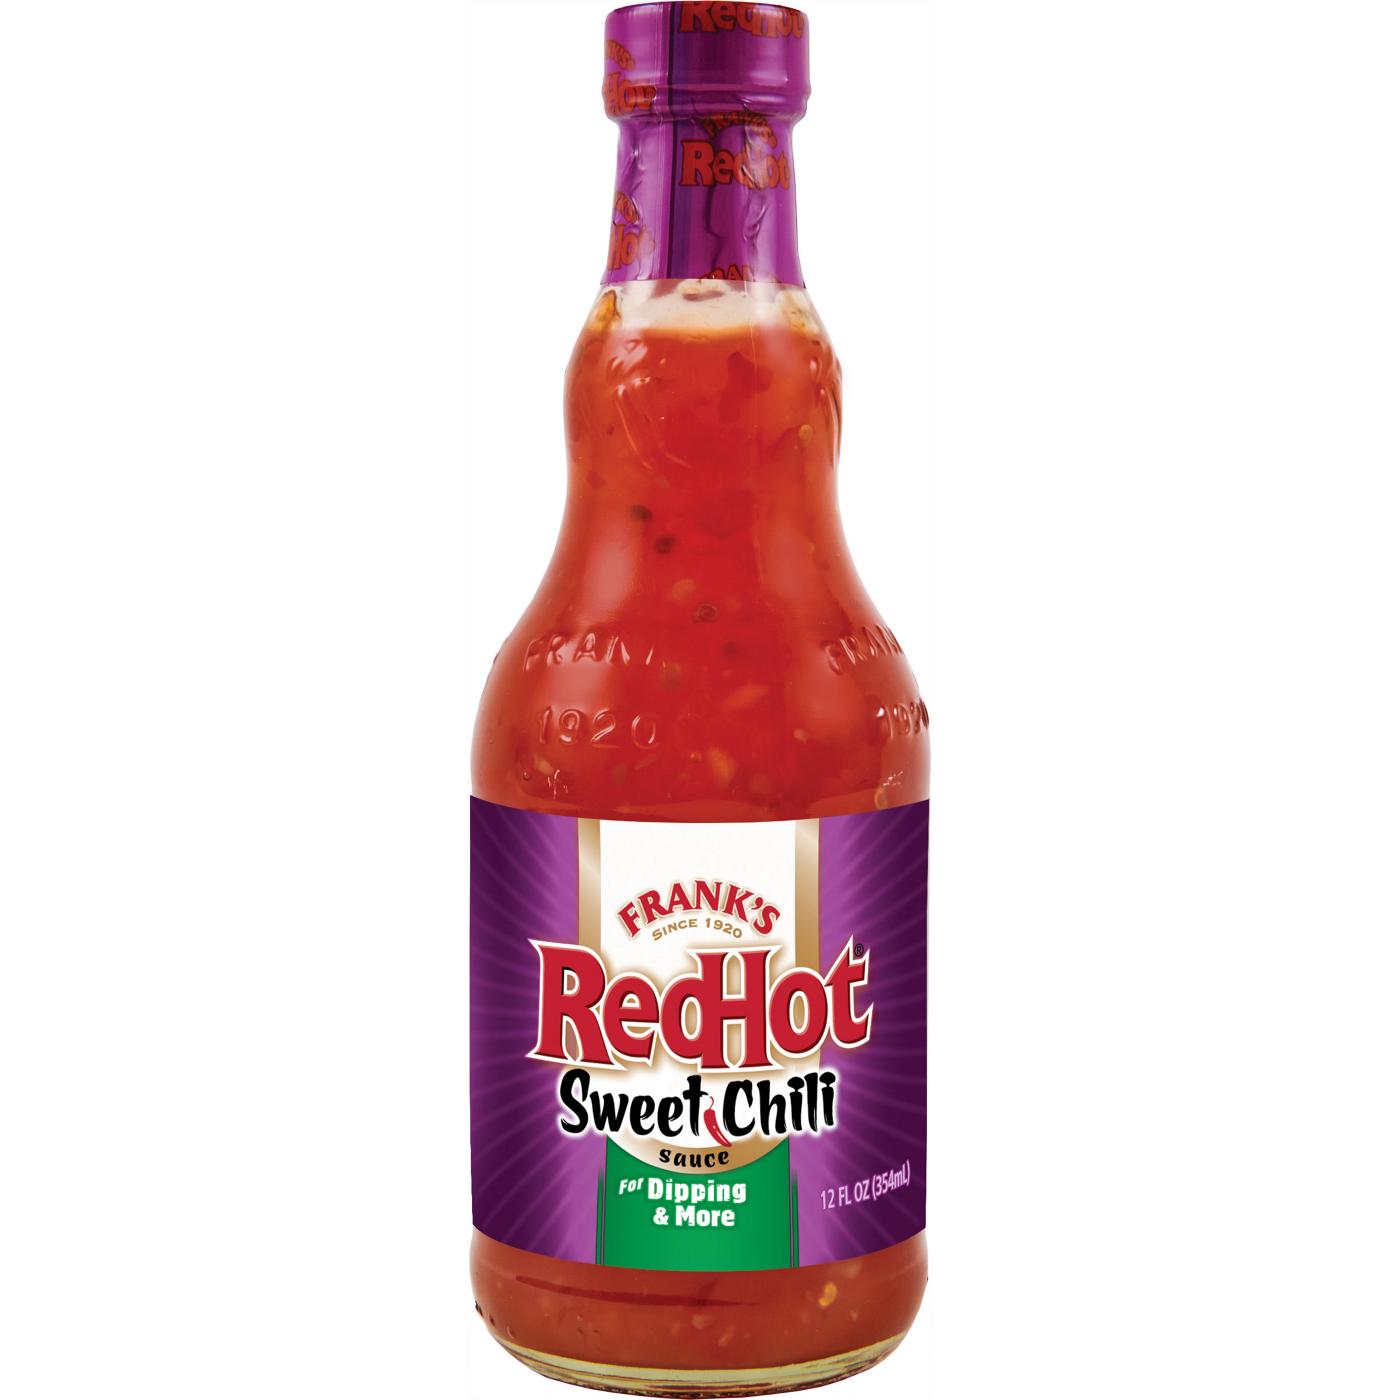 Frank's RedHot Sweet Chili Hot Sauce; image 1 of 7